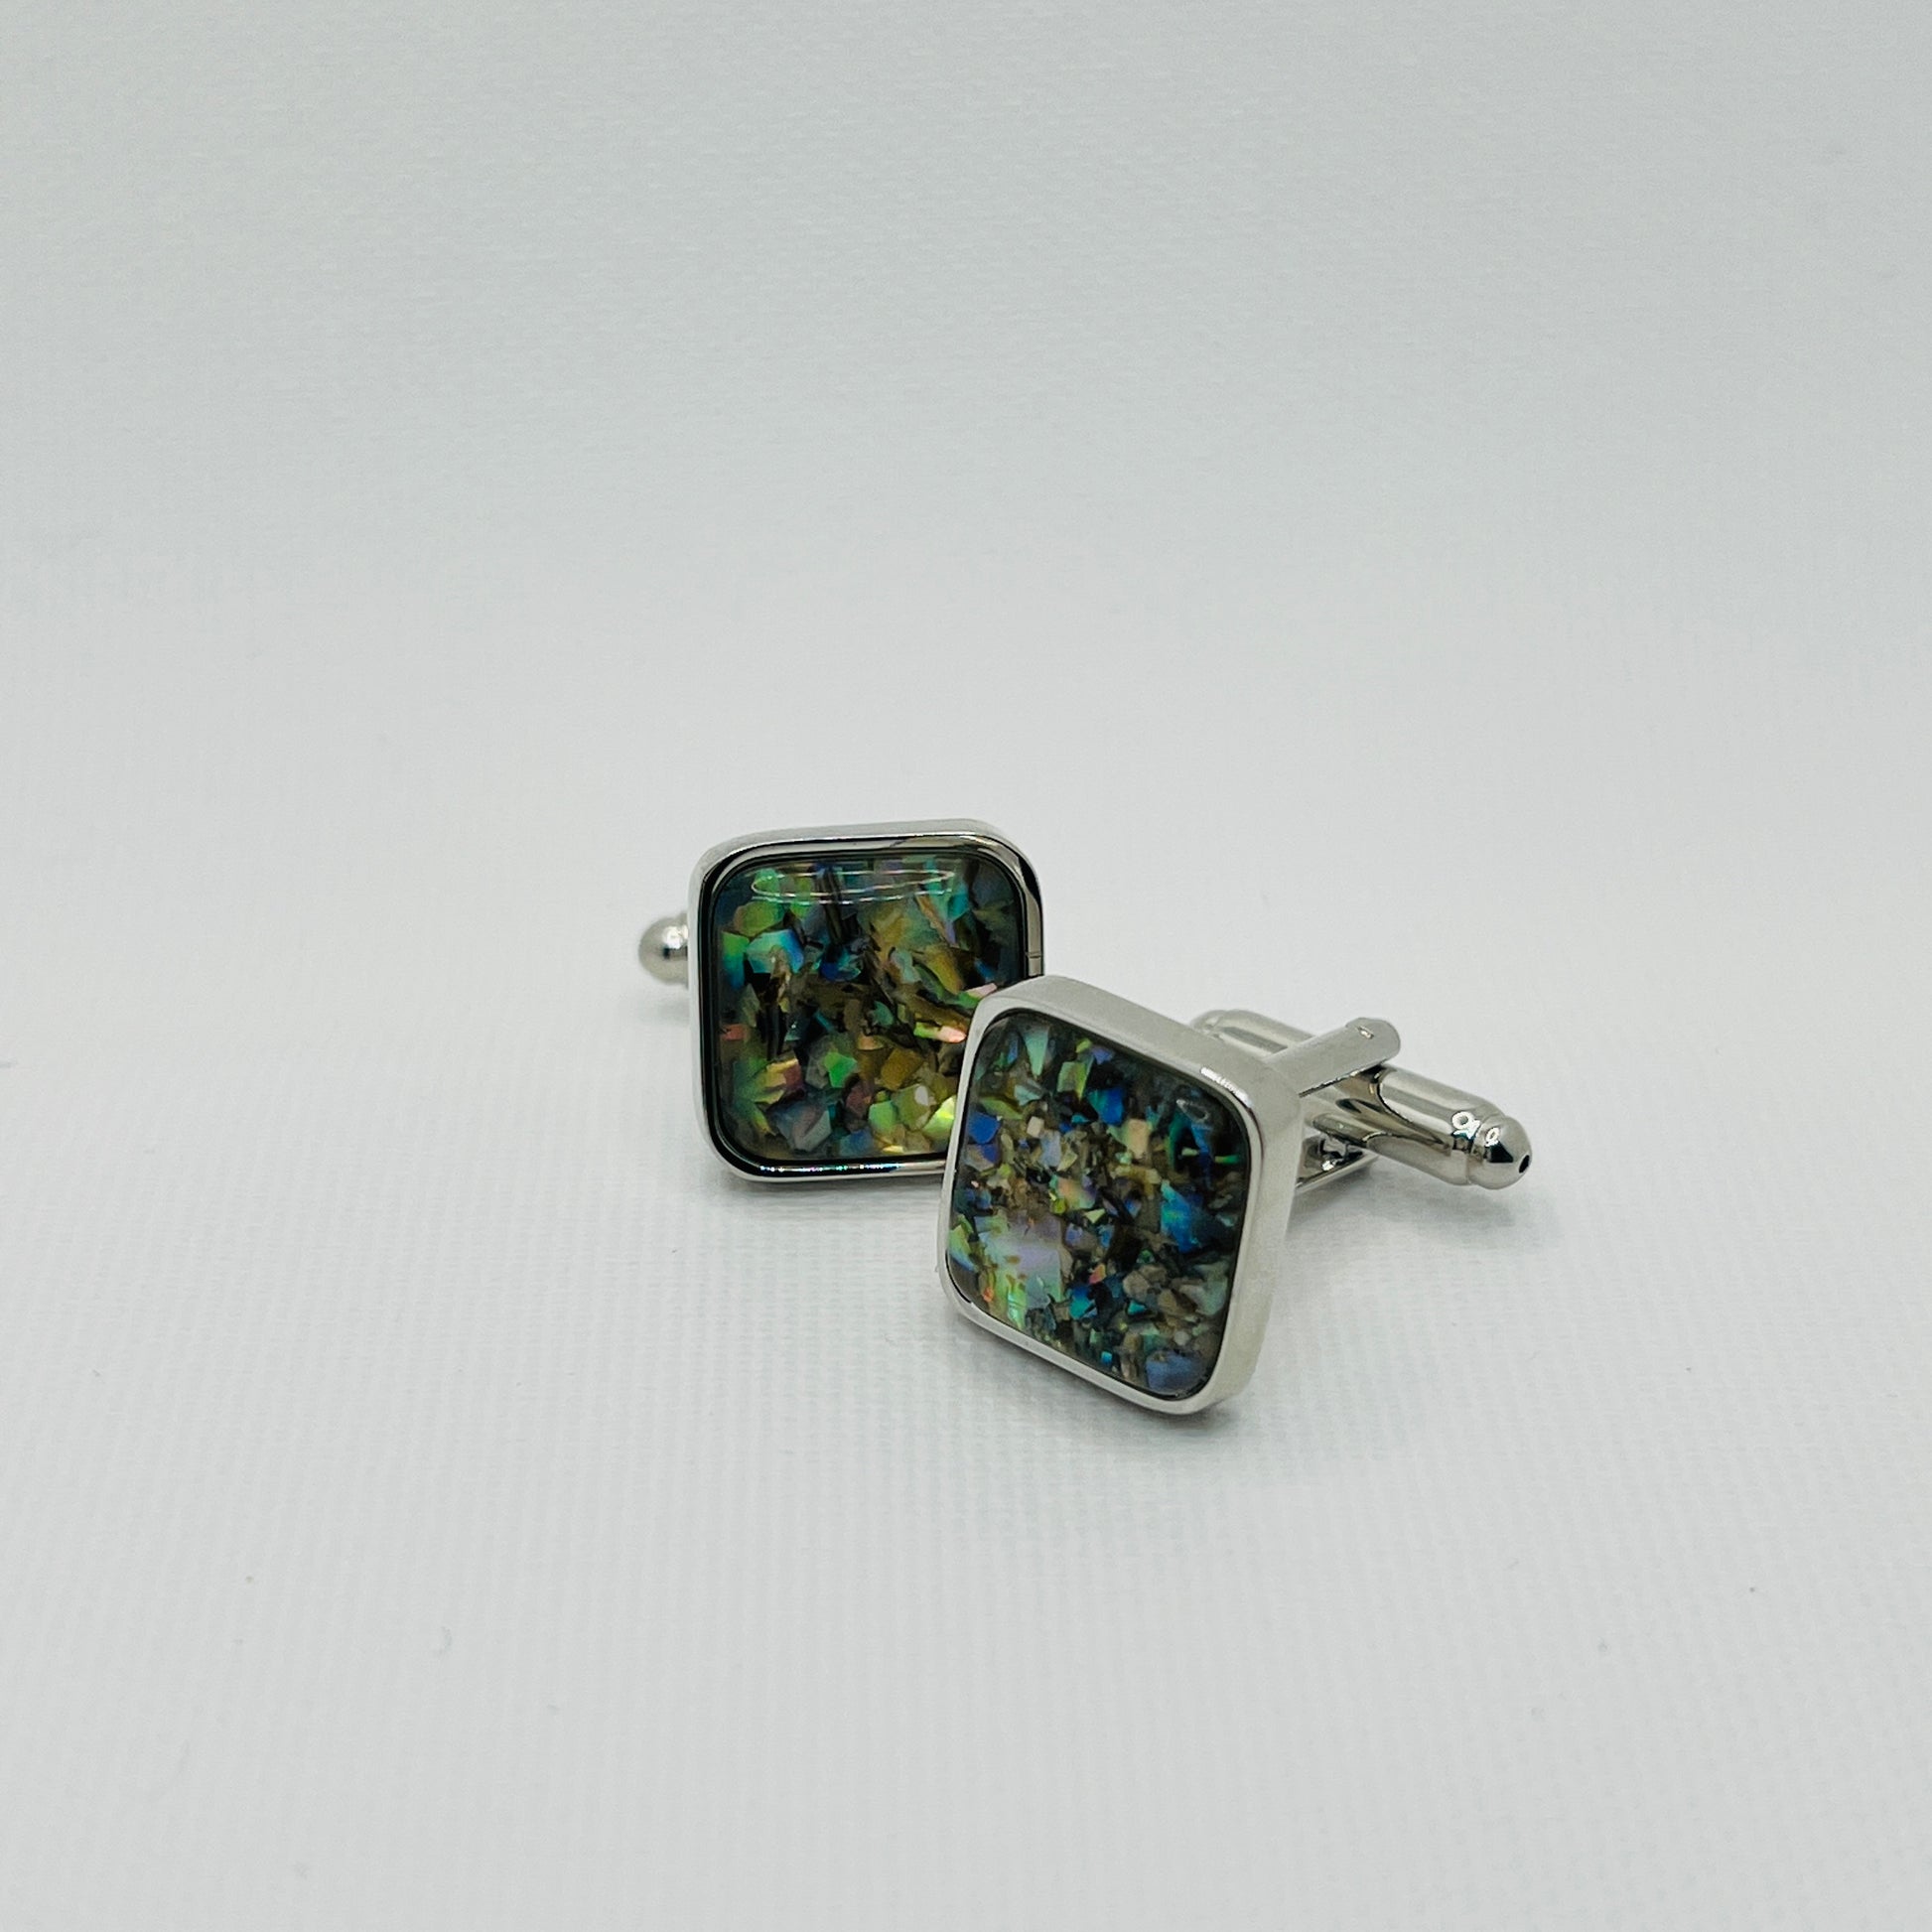 Tasker & Shaw | Luxury Menswear | Square silver cufflinks with colourful mother of pearl inlay